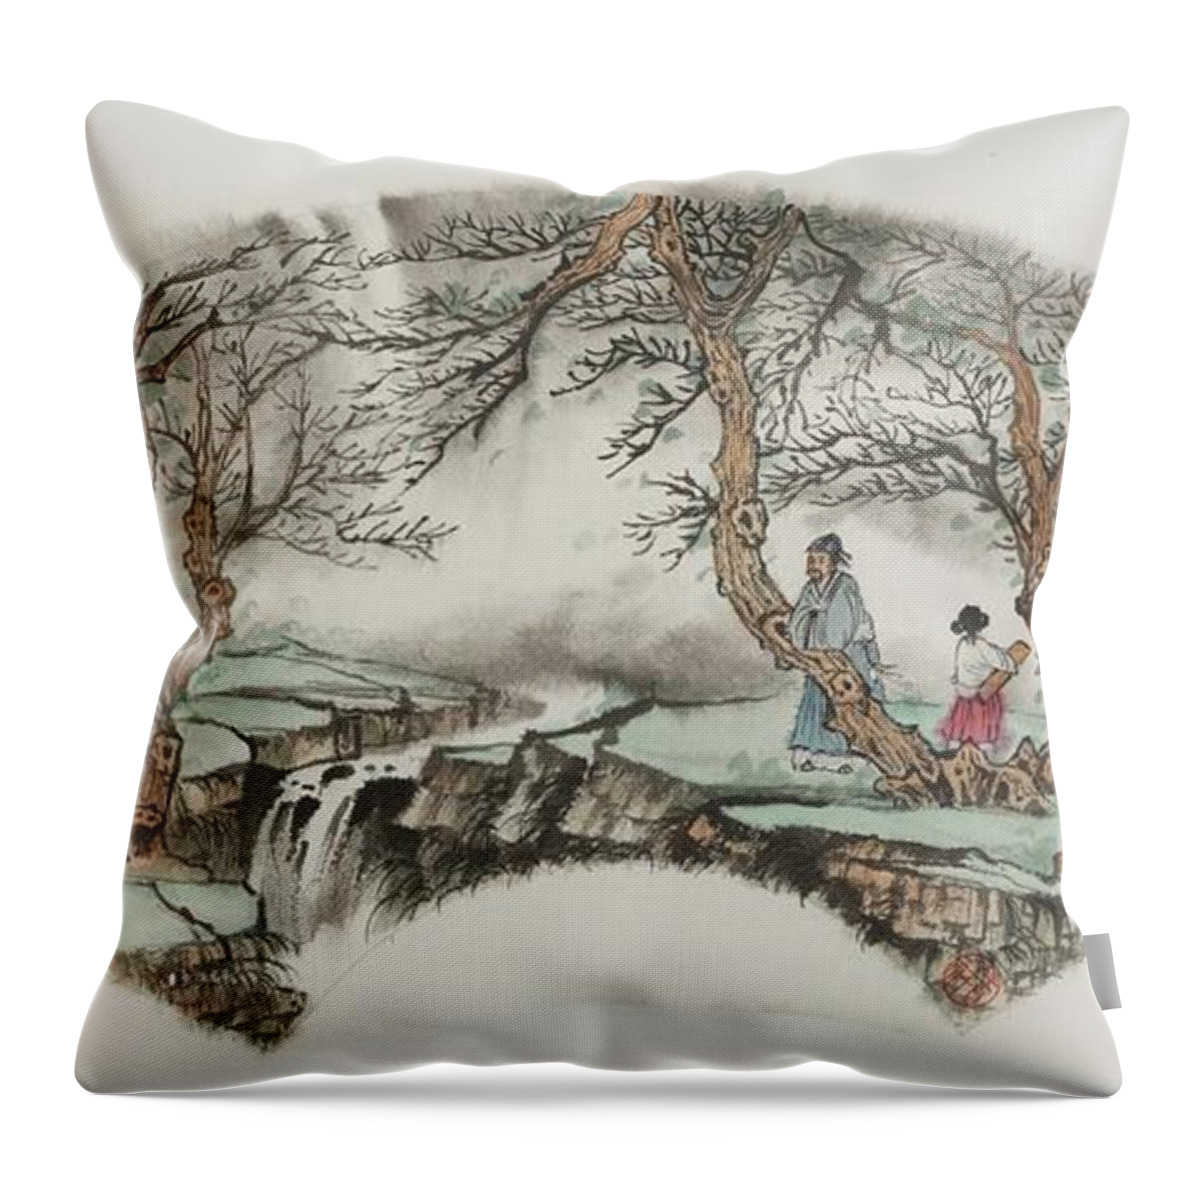 Chinese Watercolor Throw Pillow featuring the painting Zheng Player by Jenny Sanders